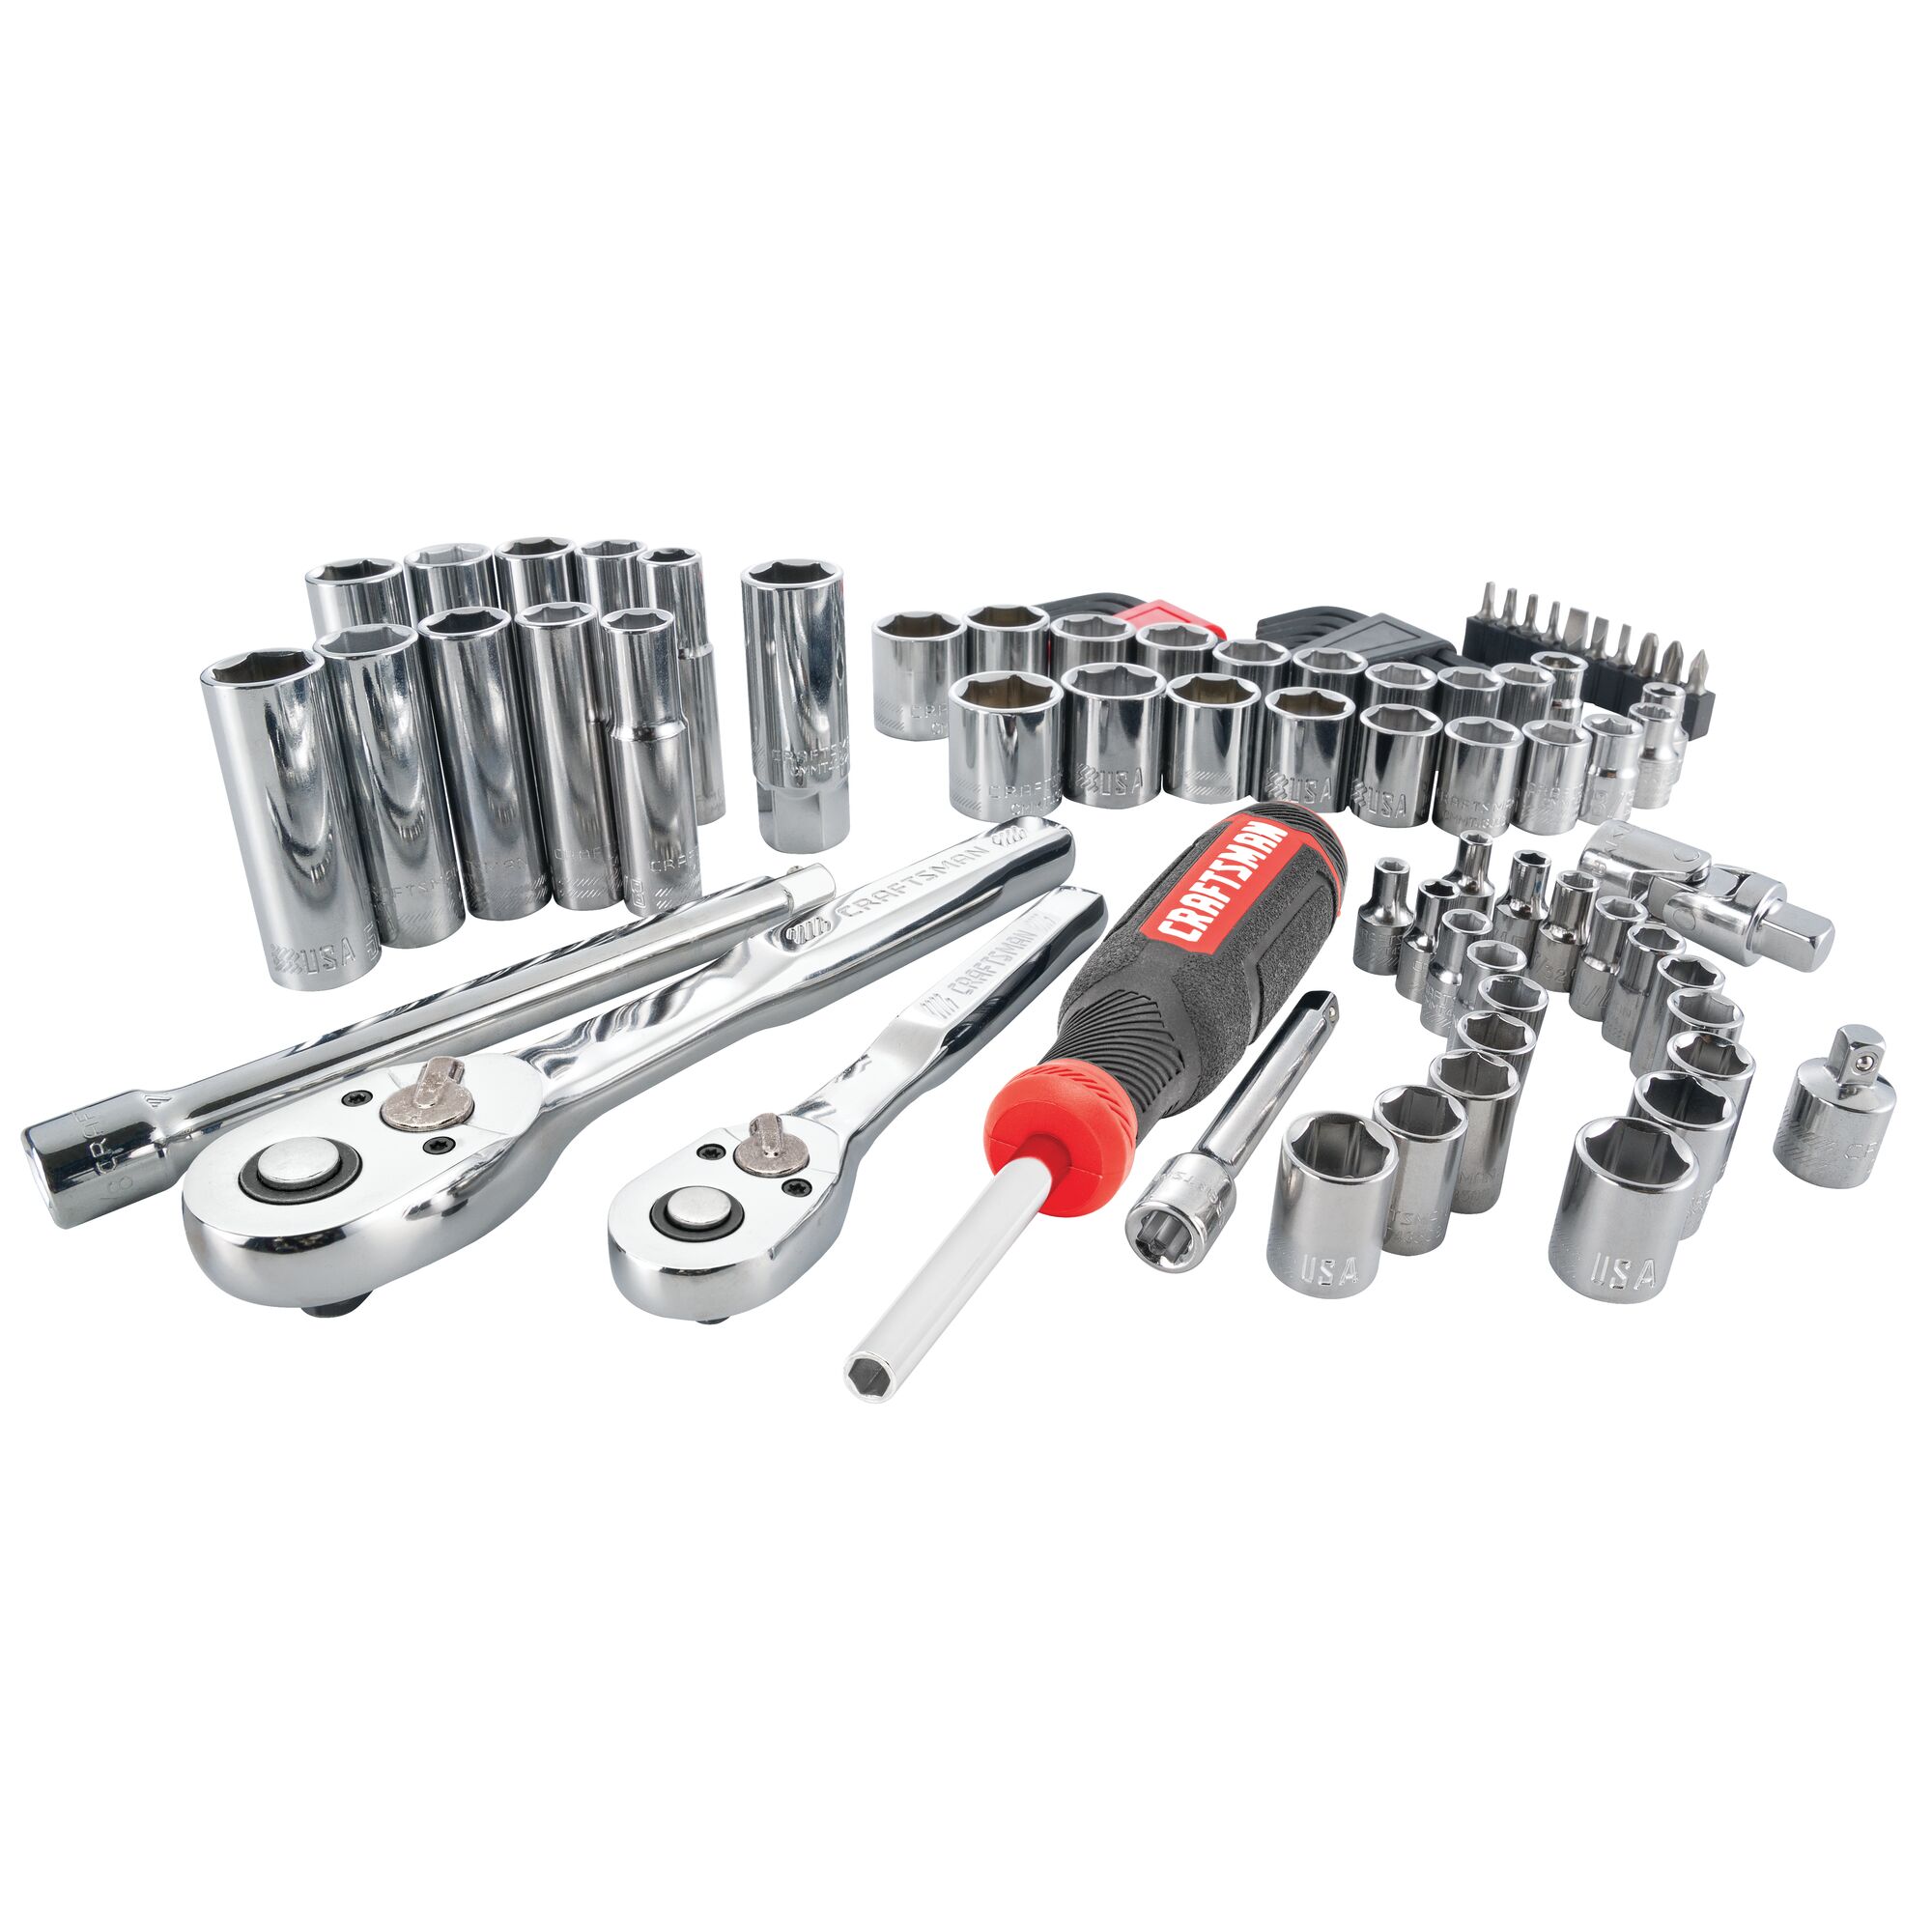 at Case Tool 88-Piece Sets Mechanics Hard the Chrome in Tool Polished CRAFTSMAN department with Mechanics Standard (SAE) Metric Set and